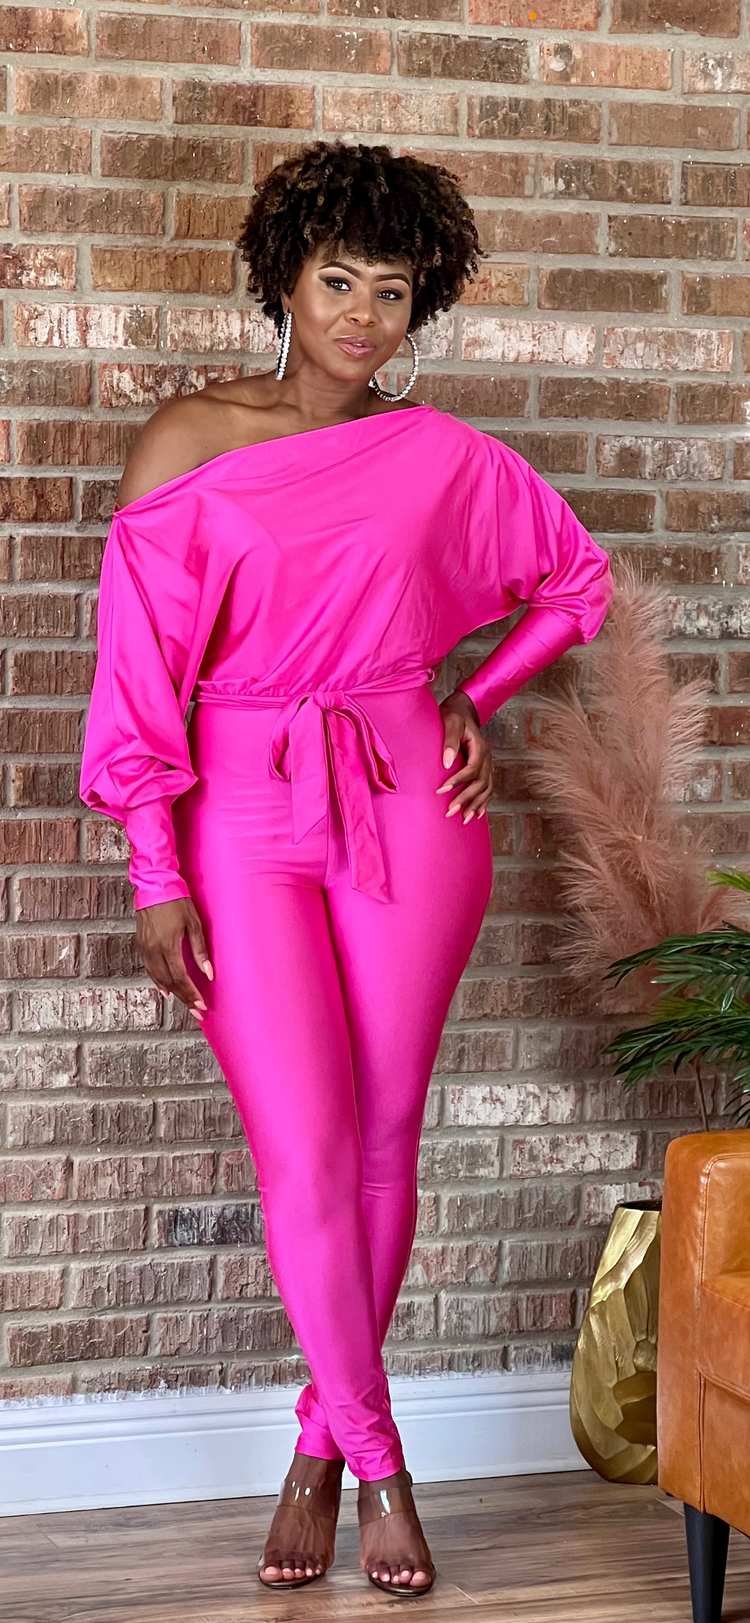 Get To It Jumper Hot Pink (7 colors)